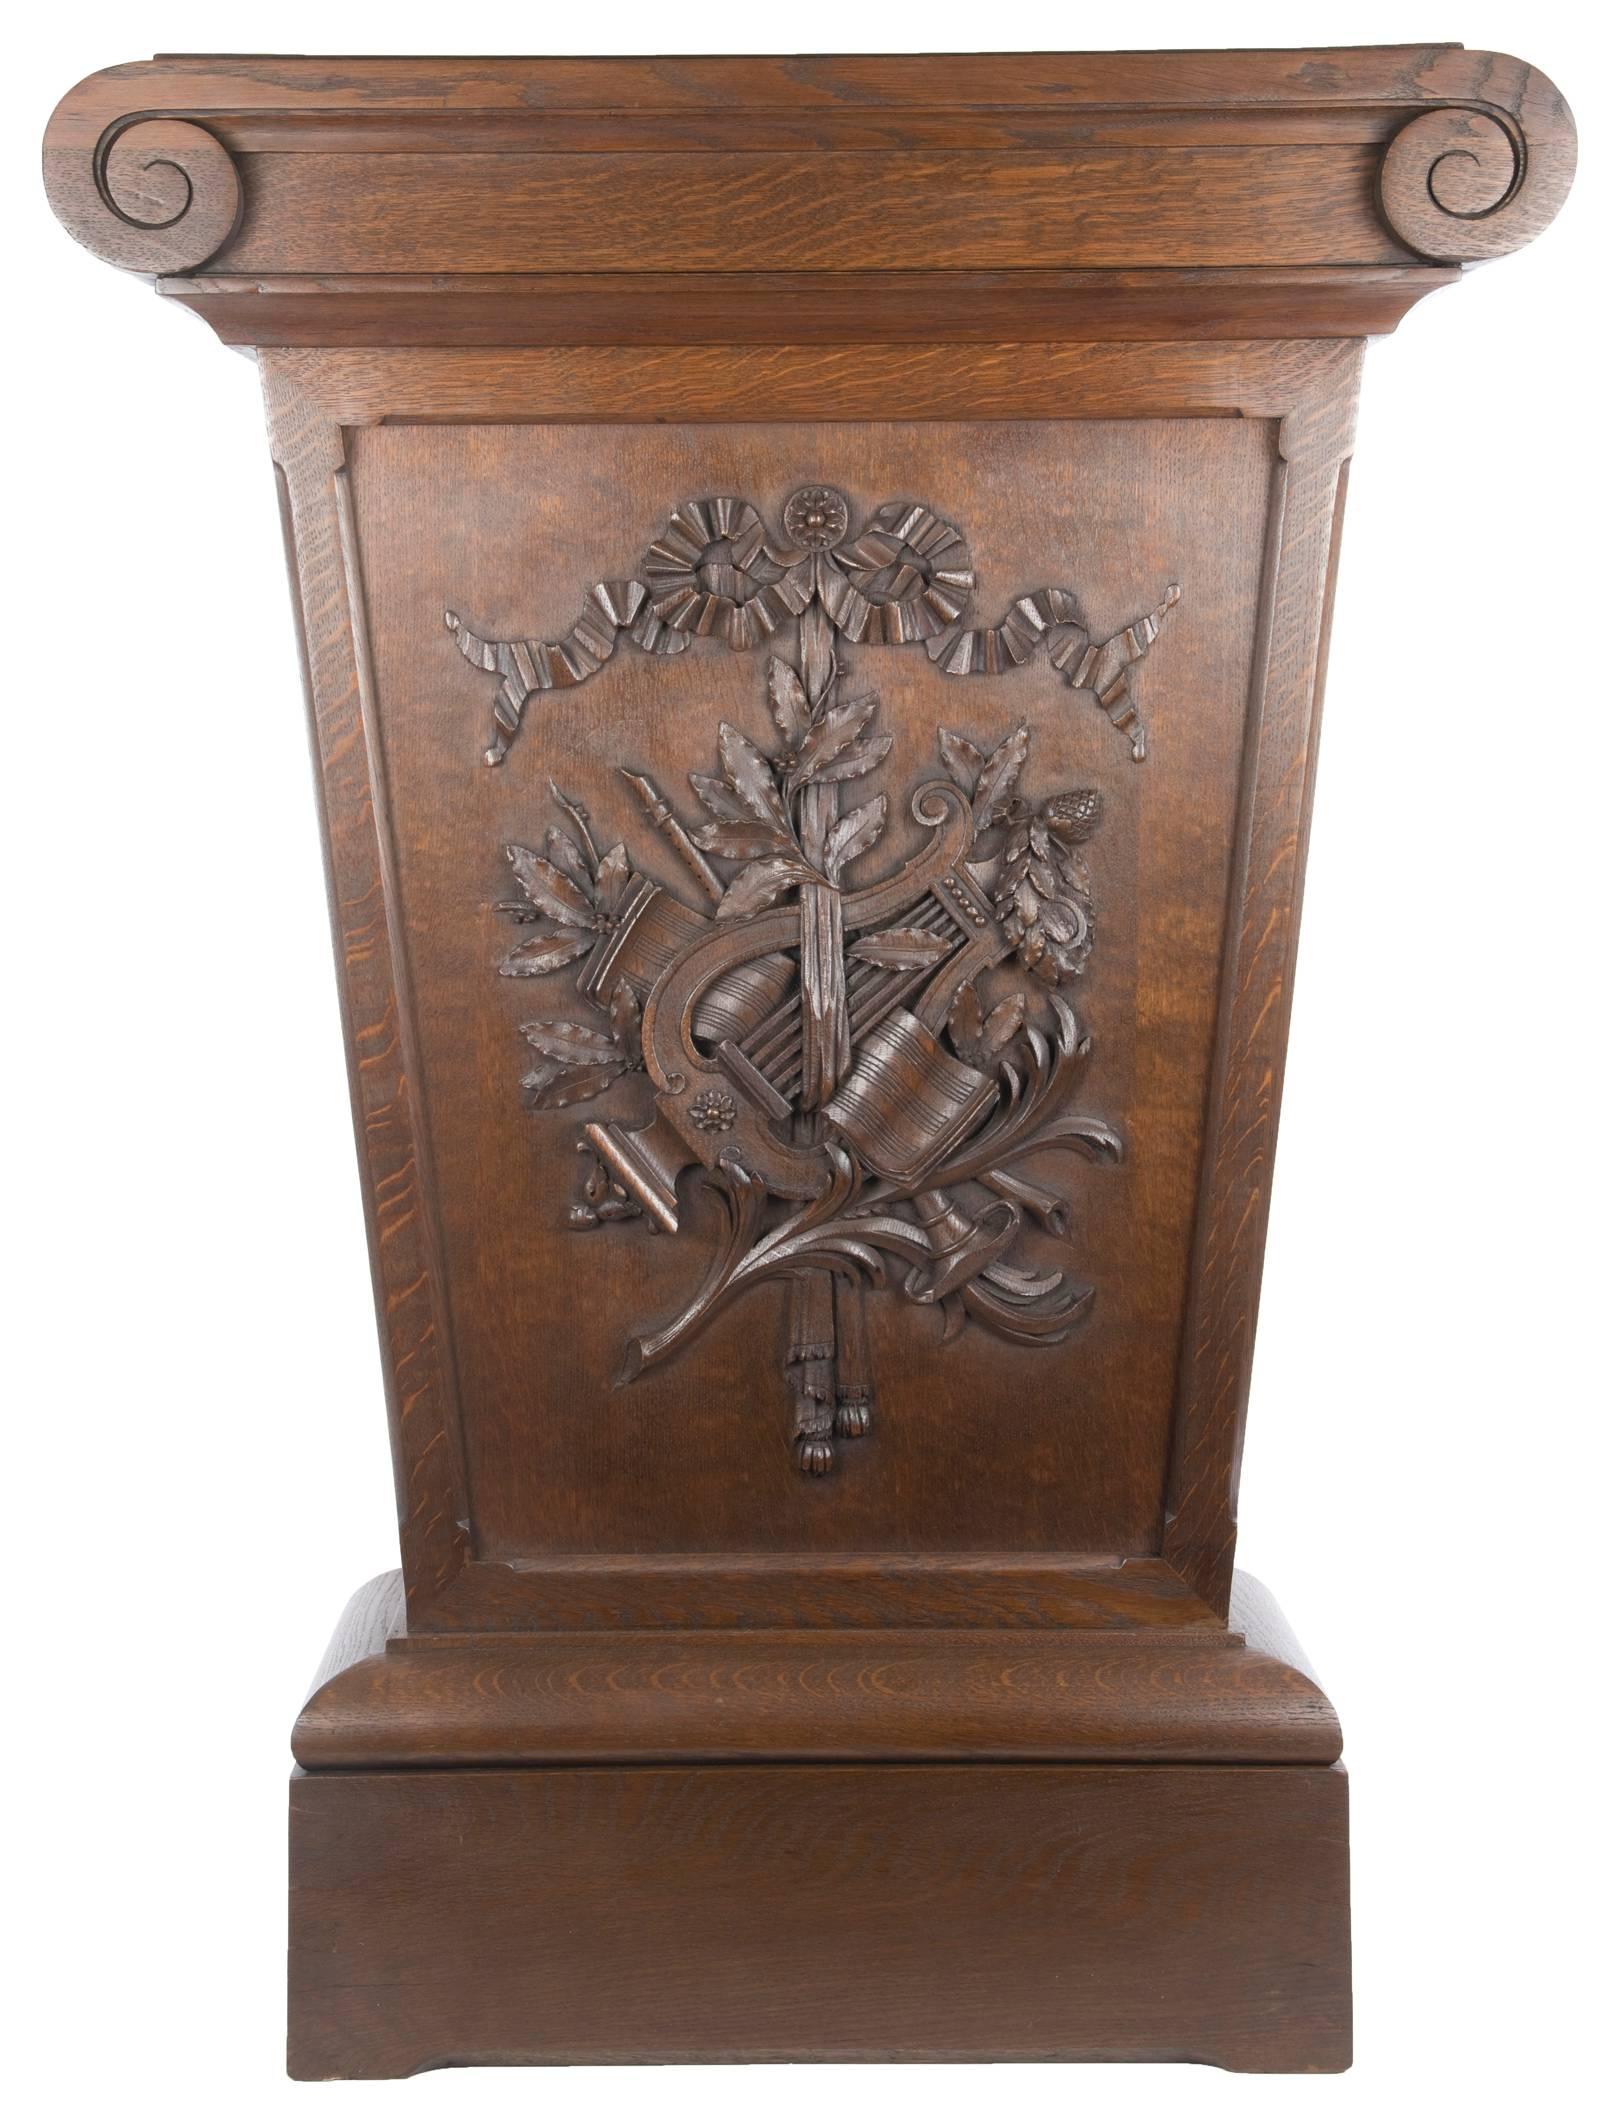 An oak pedestal stand with carved and turned scroll top, tapering form and raised on simple plinth base. Hanging from a carved rosette and tied stylized ribbon, the front panel is decorated with a carved applique of a harp and music sheets, clarinet